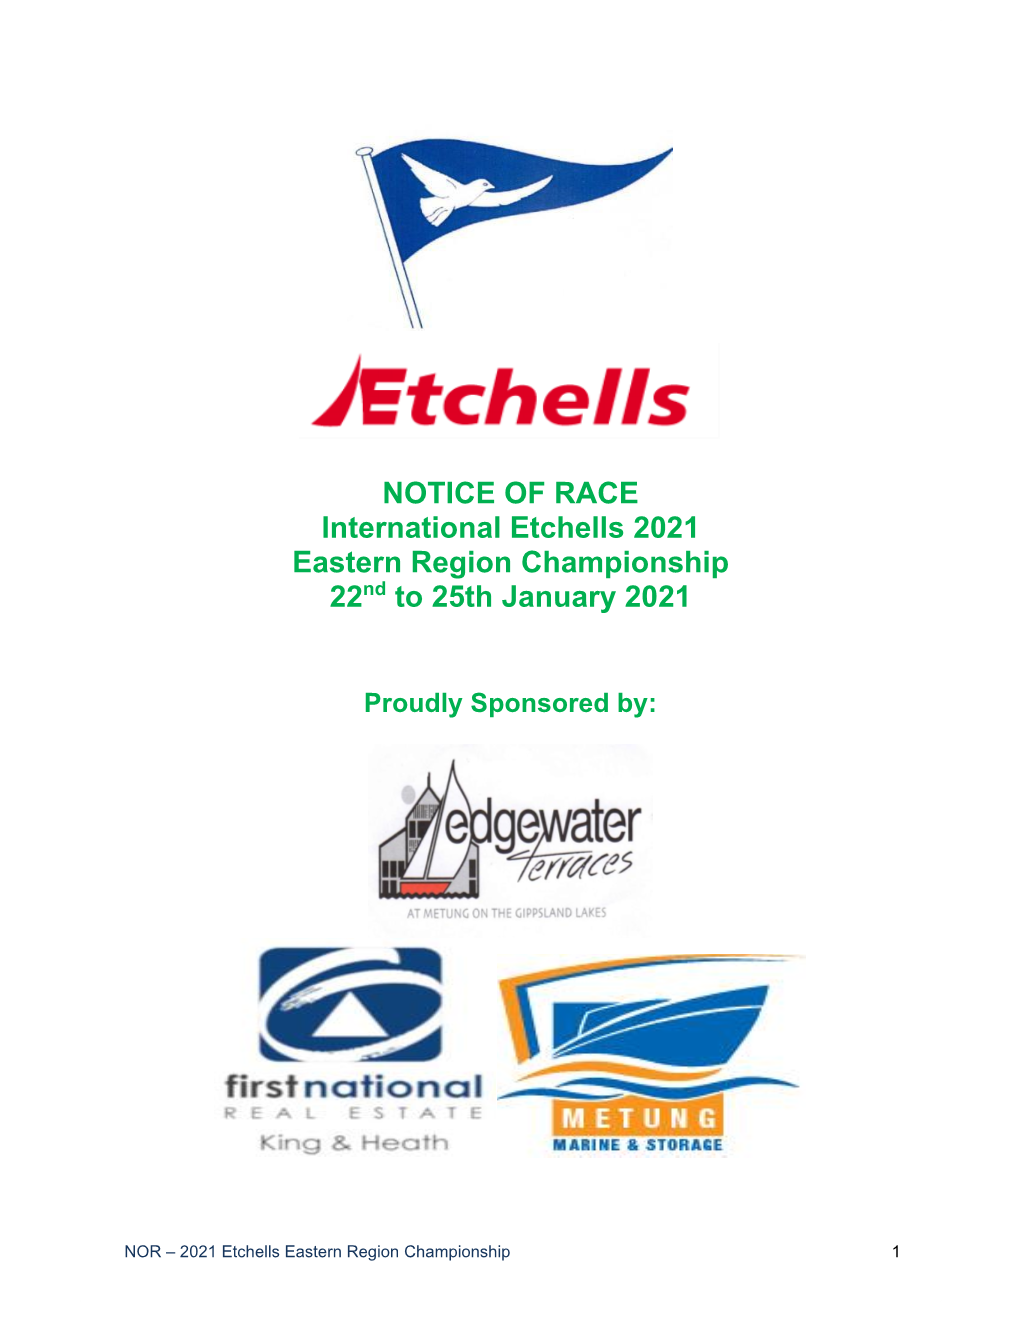 NOTICE of RACE International Etchells 2021 Eastern Region Championship 22Nd to 25Th January 2021